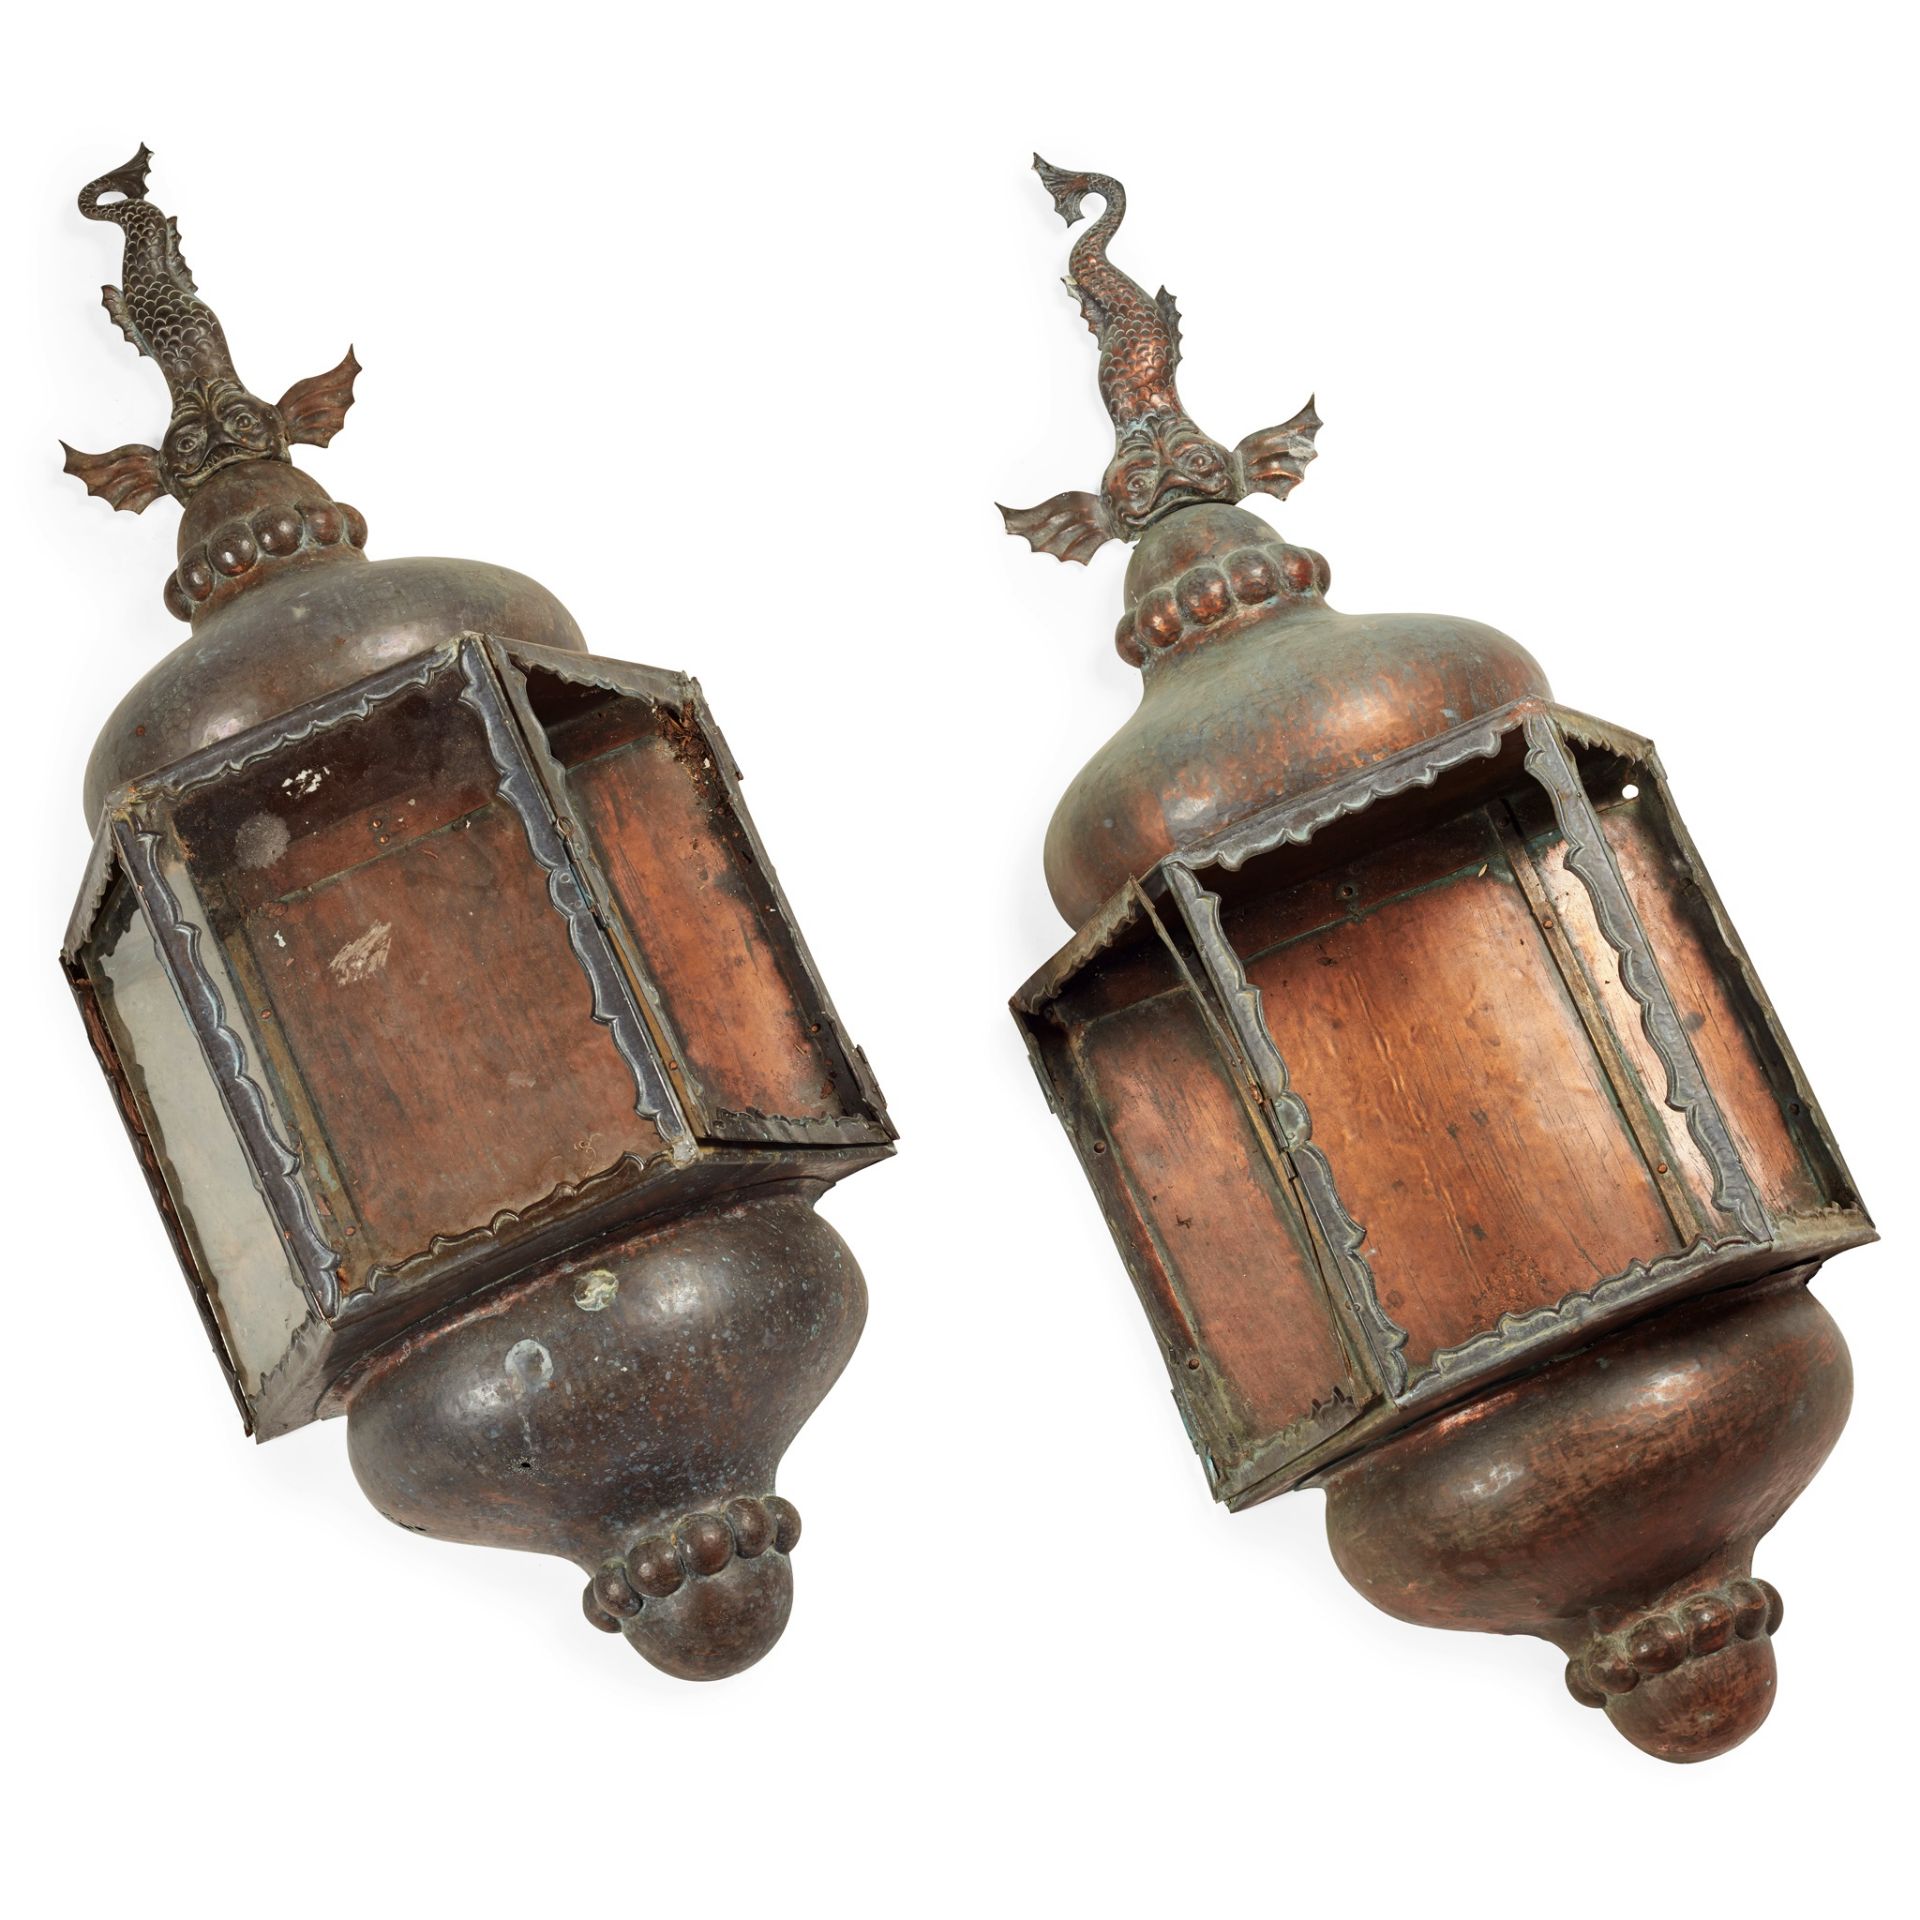 PAIR OF REGENCY COPPER SCONCES EARLY 19TH CENTURY